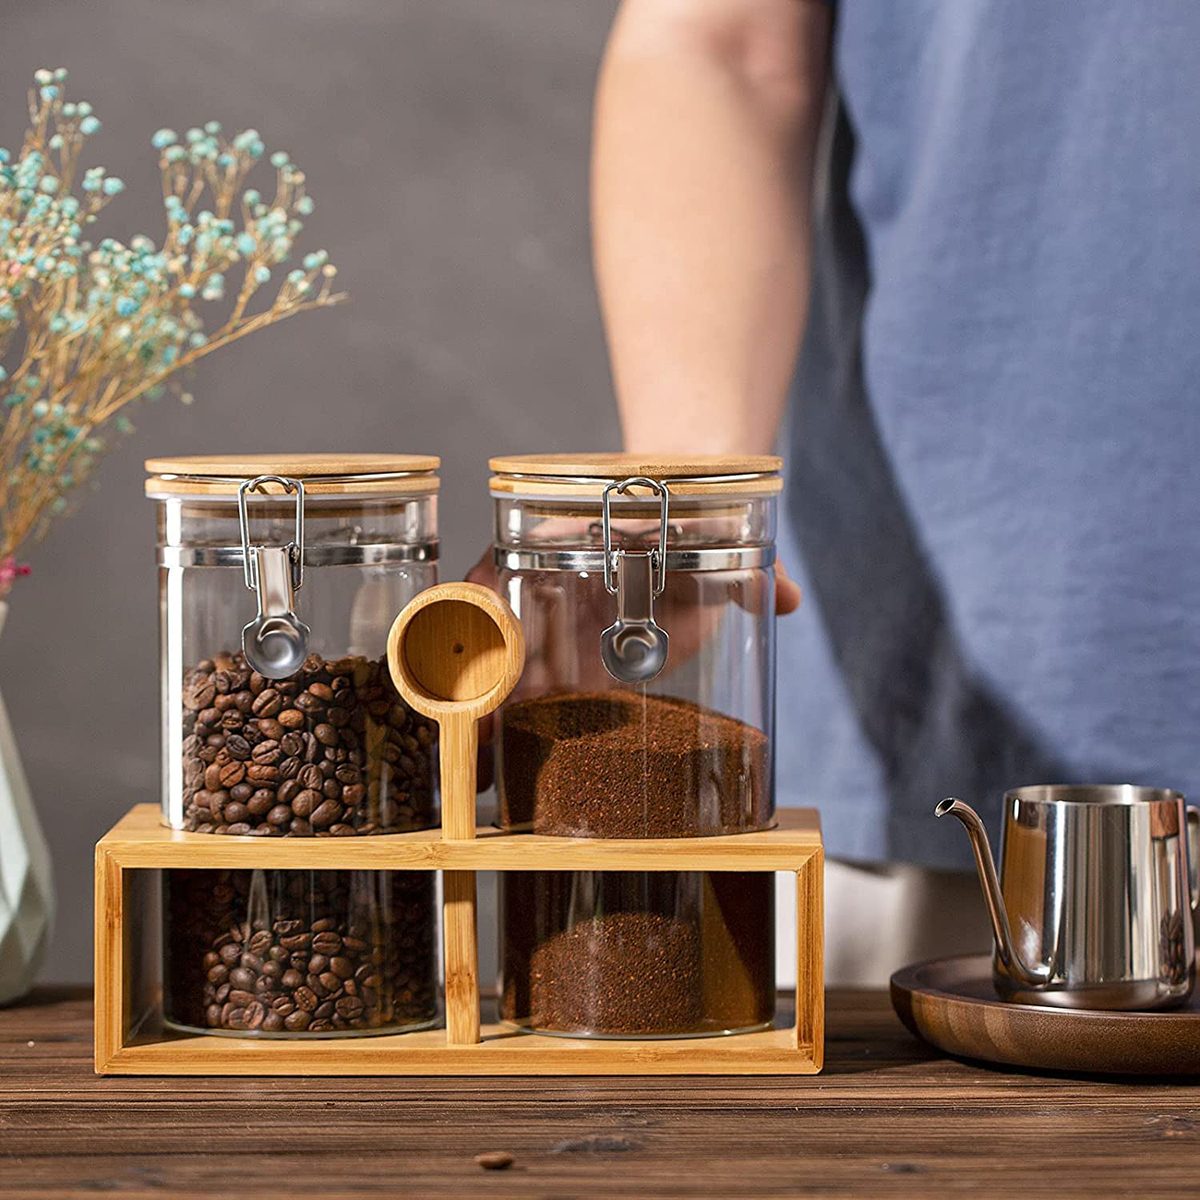 6 Best Coffee Container Options to Keep Your Coffee Fresh